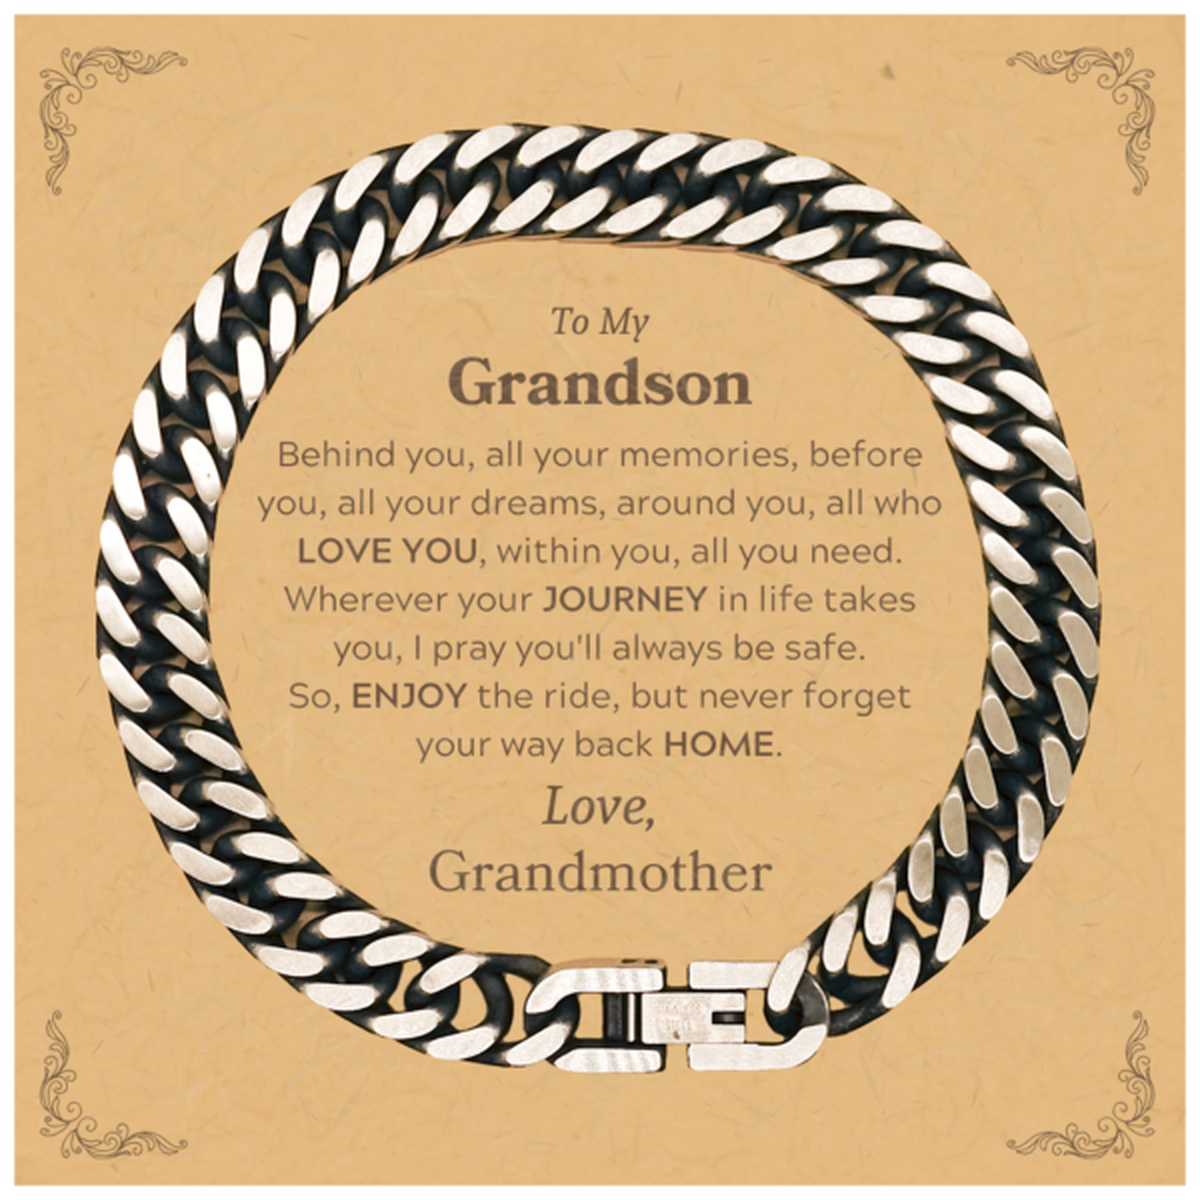 To My Grandson Graduation Gifts from Grandmother, Grandson Cuban Link Chain Bracelet Christmas Birthday Gifts for Grandson Behind you, all your memories, before you, all your dreams. Love, Grandmother